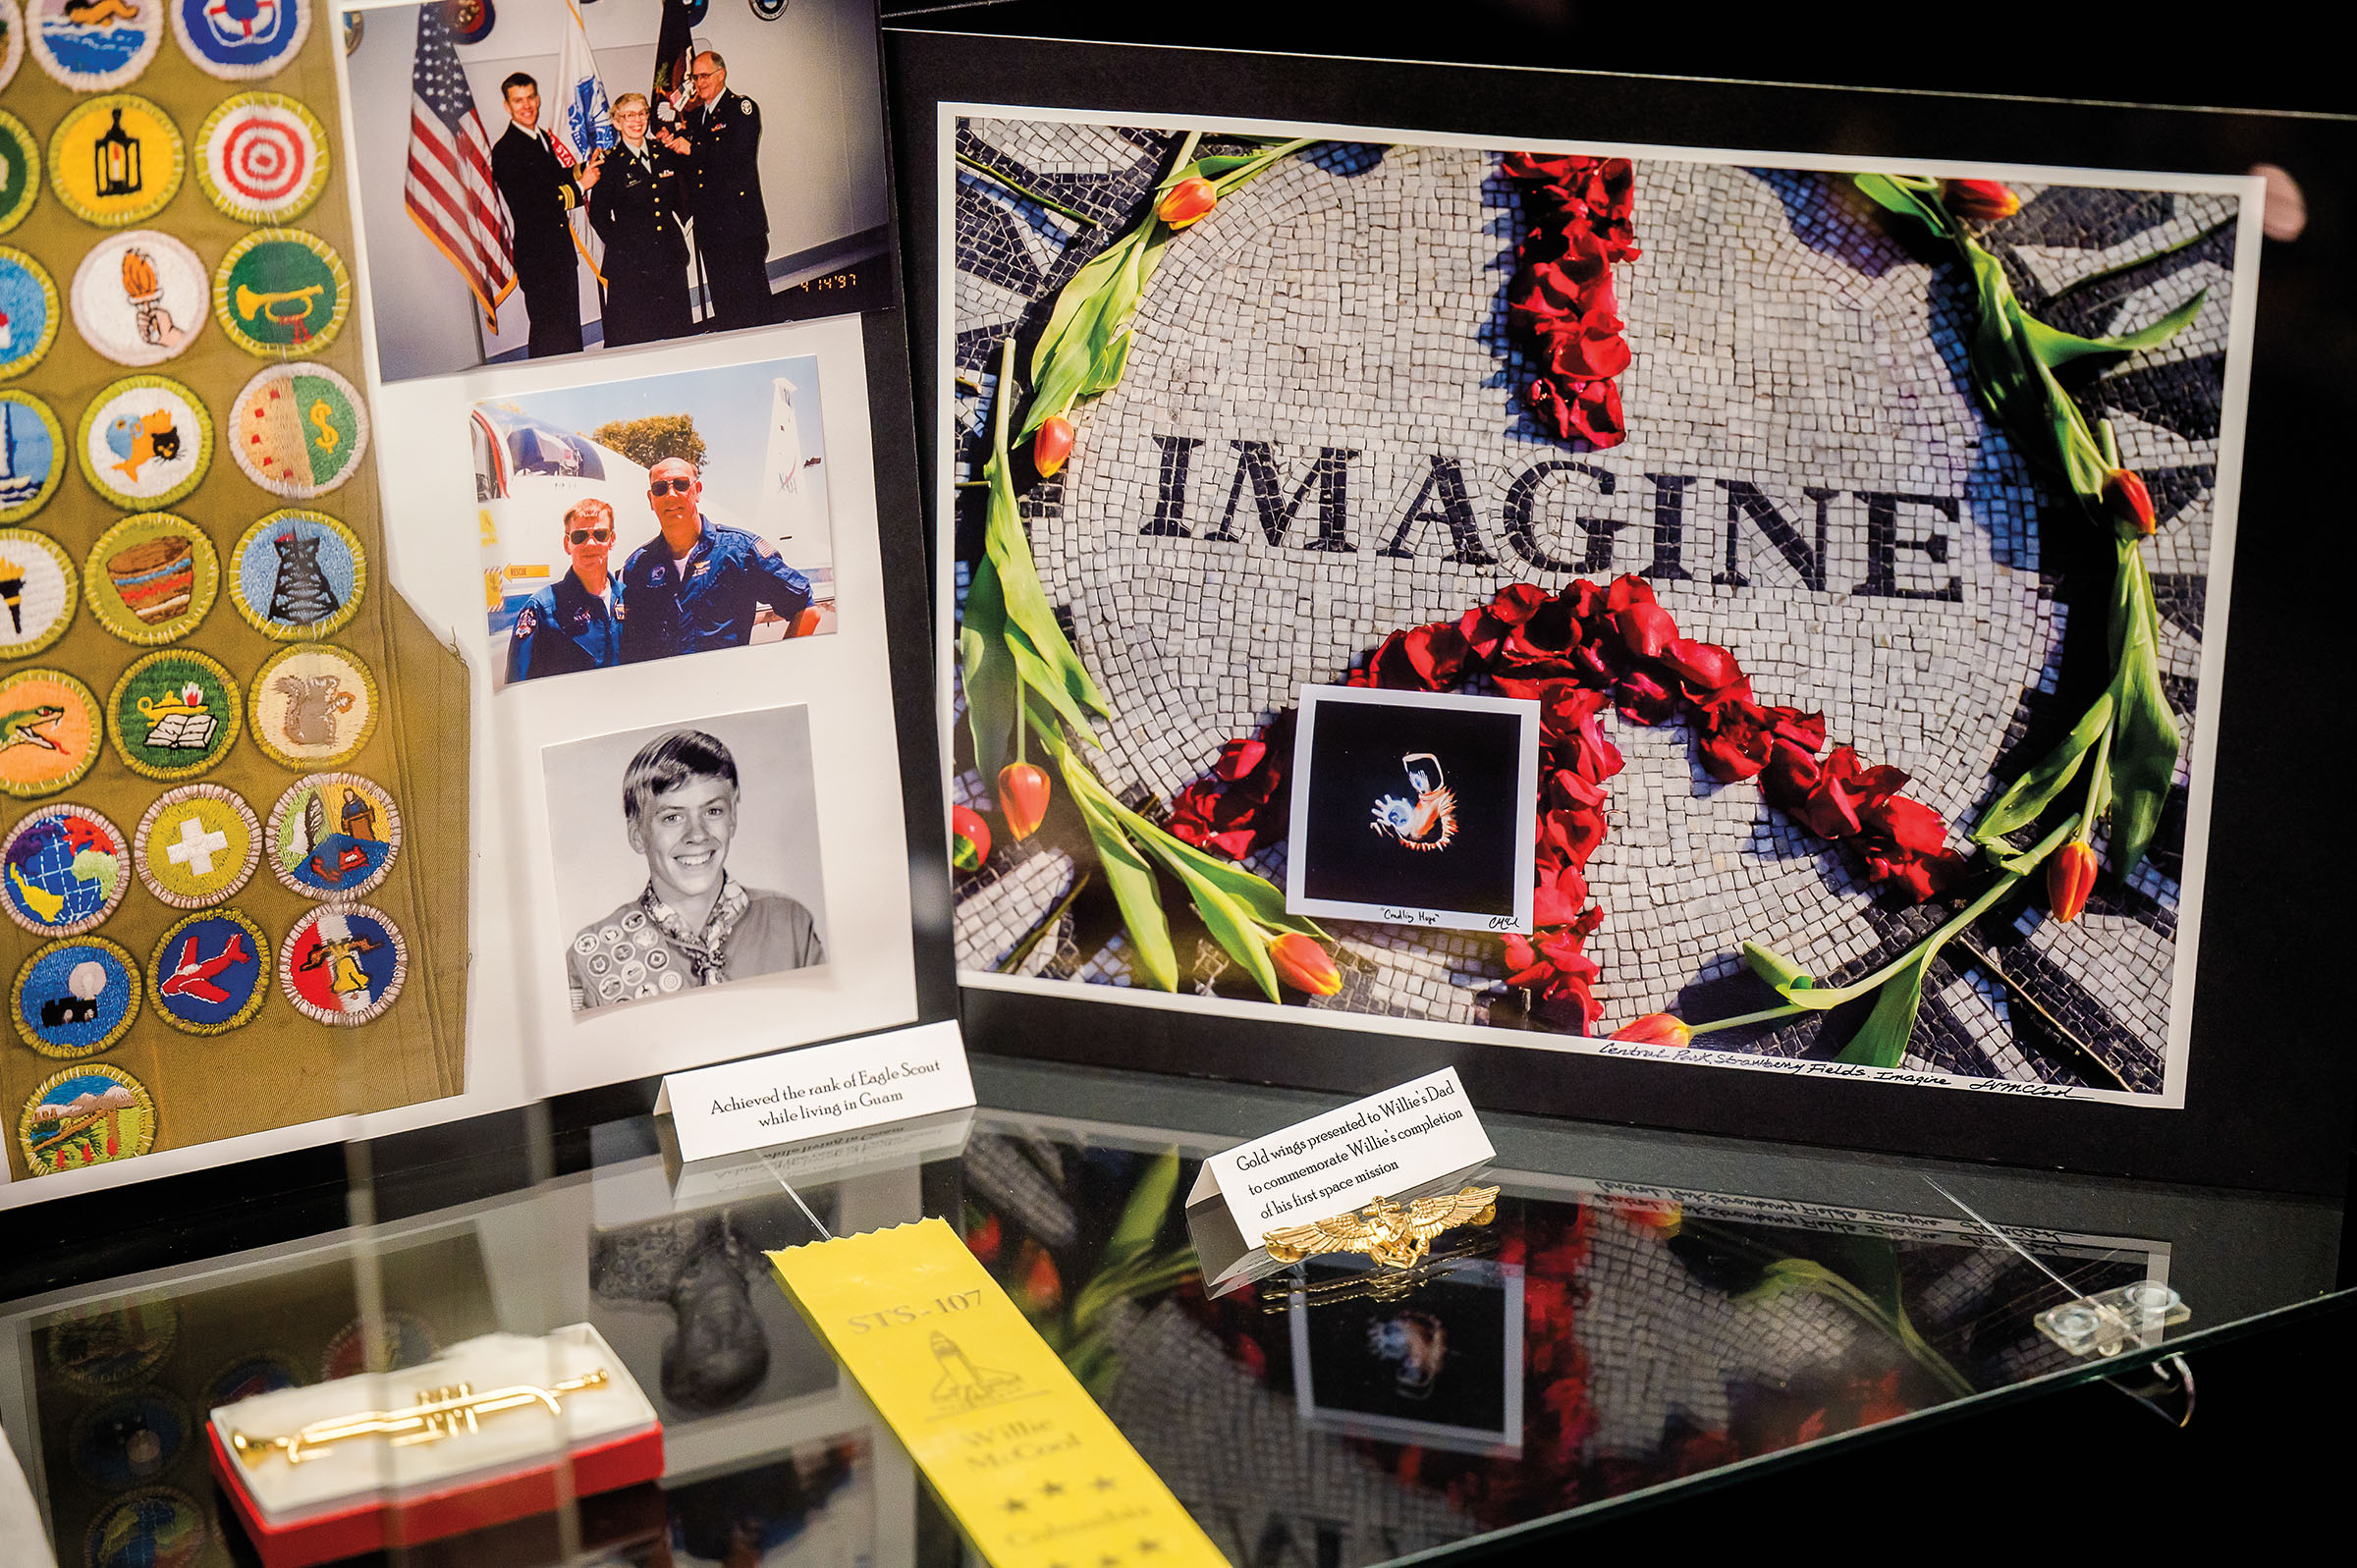 A collection of memorabilia and photos including a picture of a brick circle with the words "Imagine"